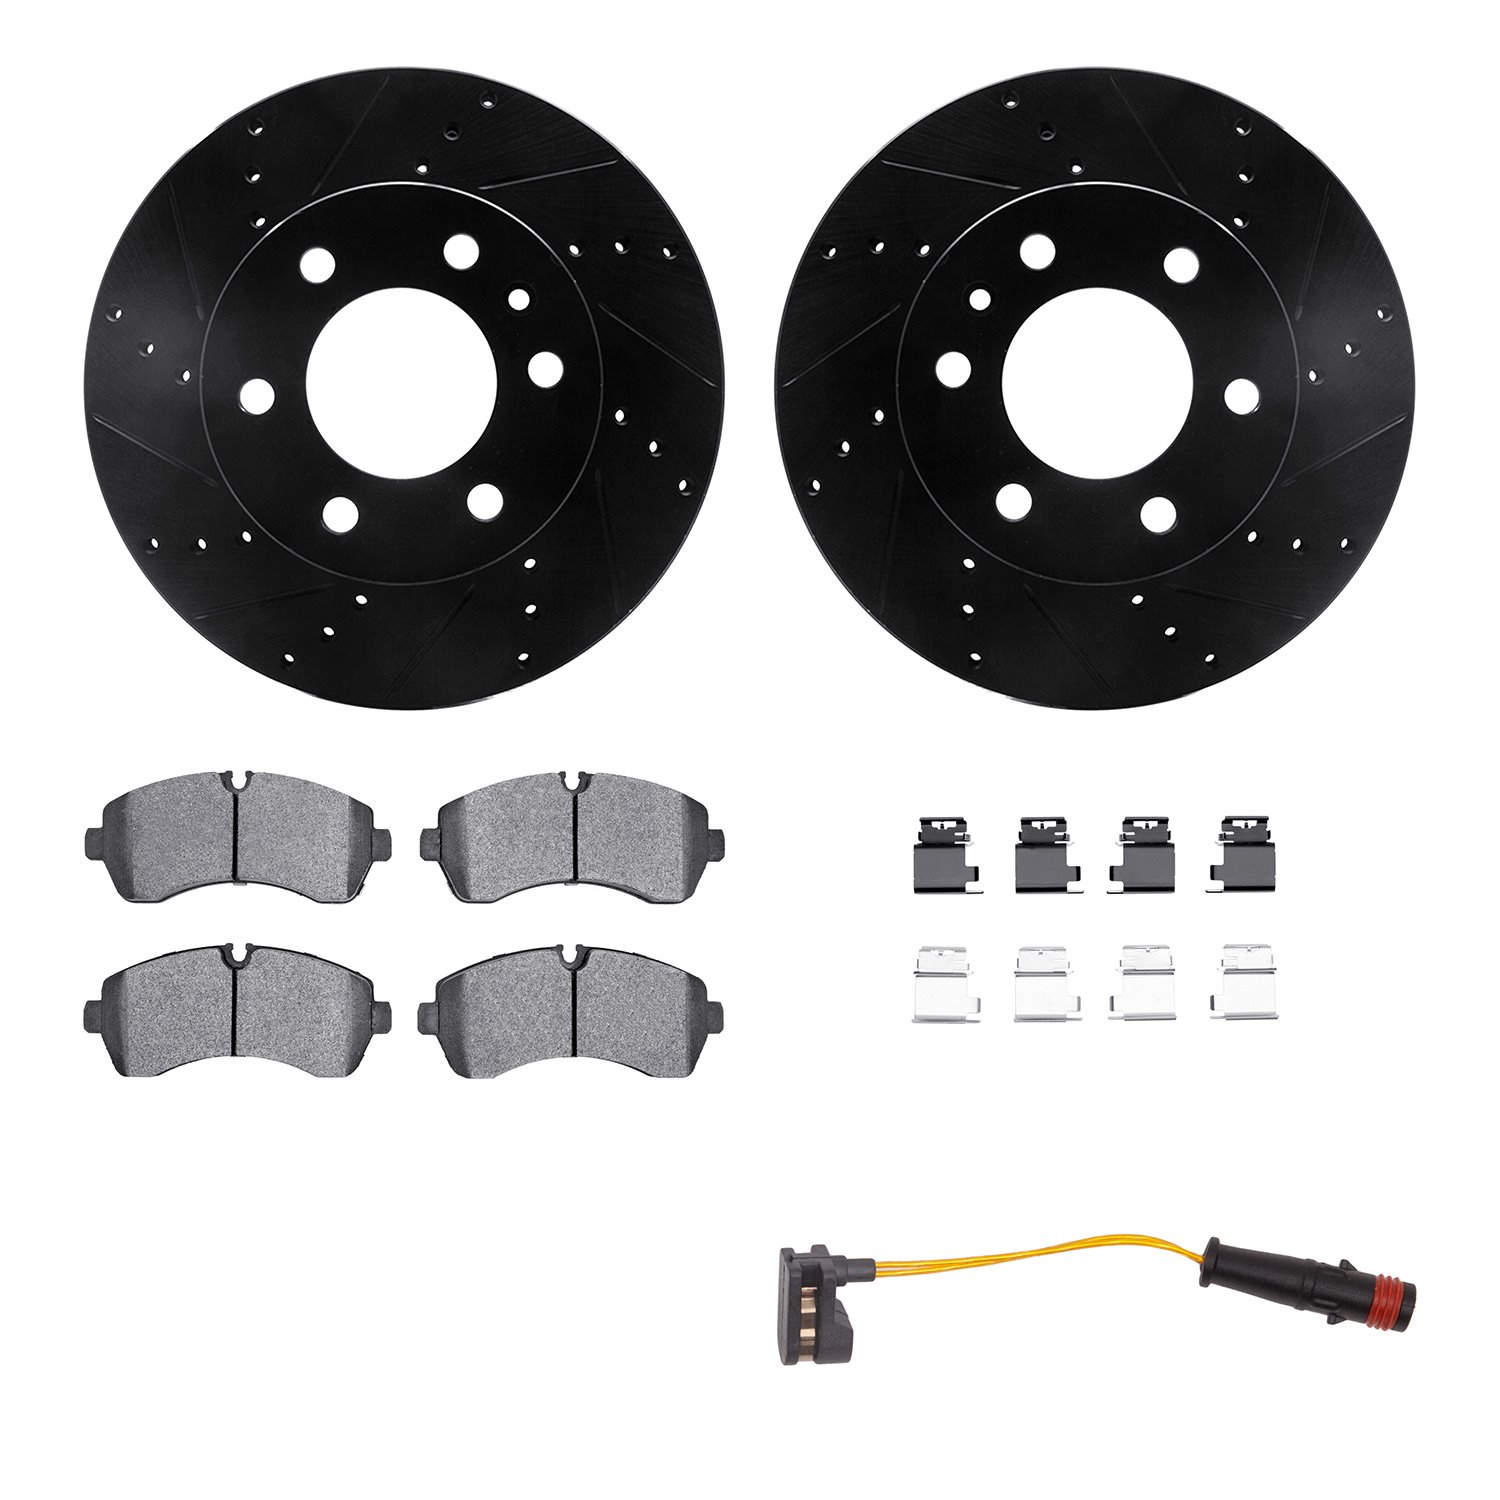 8222-40012 Drilled/Slotted Rotors w/Heavy-Duty Brake Pads/Sensor & Hardware [Silver], Fits Select Multiple Makes/Models, Positio